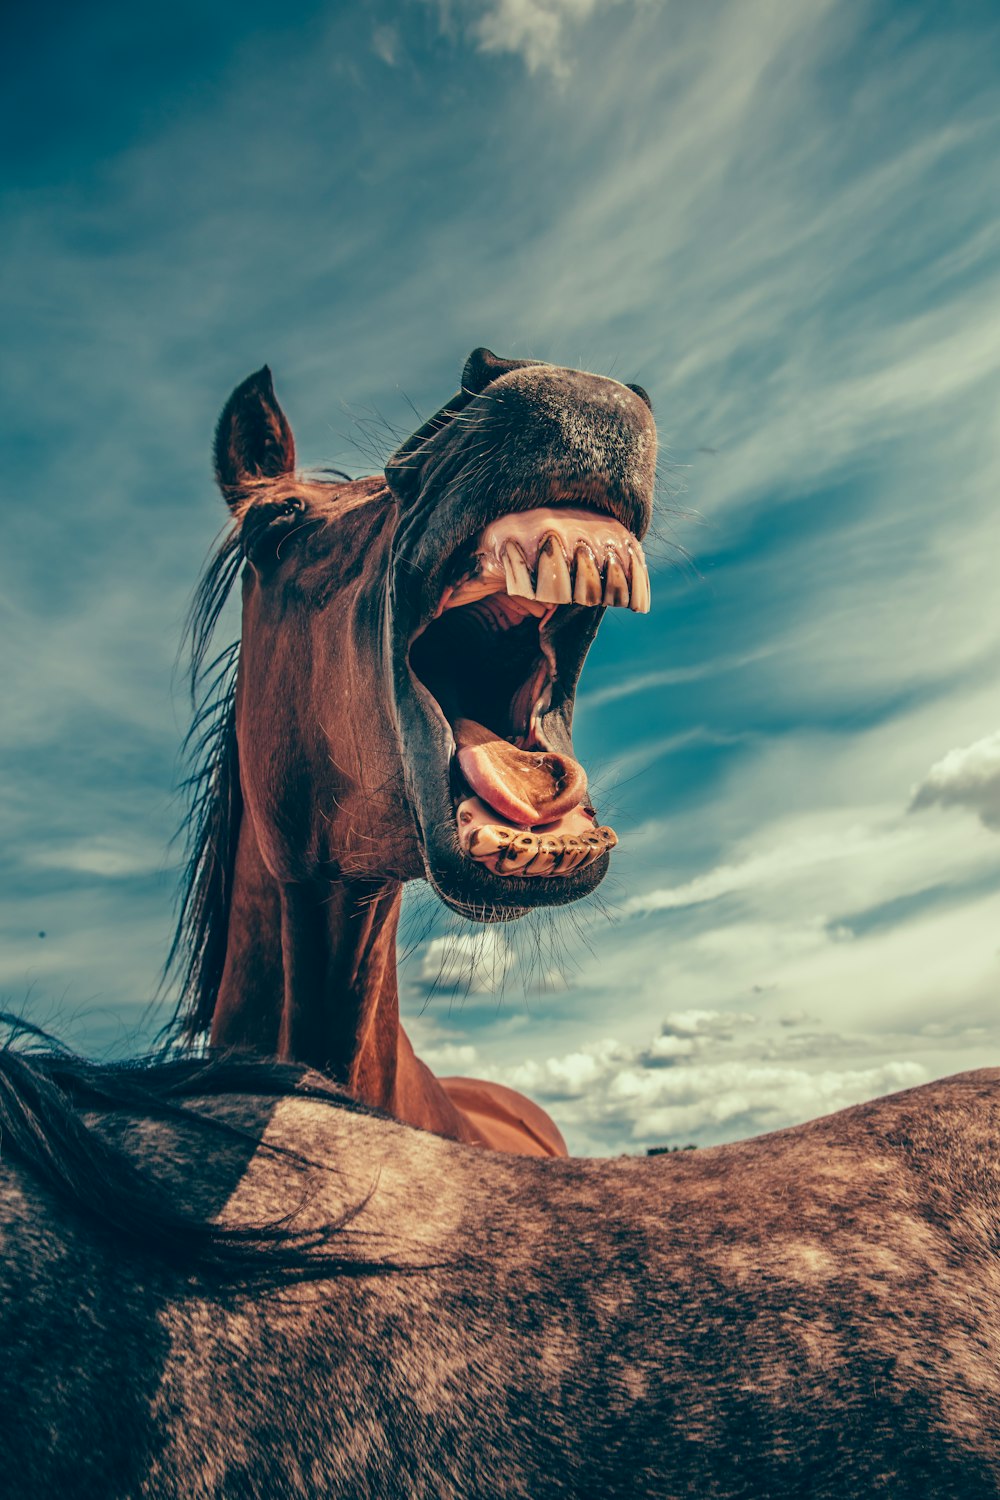 photo of shouting horse under cloudy sky